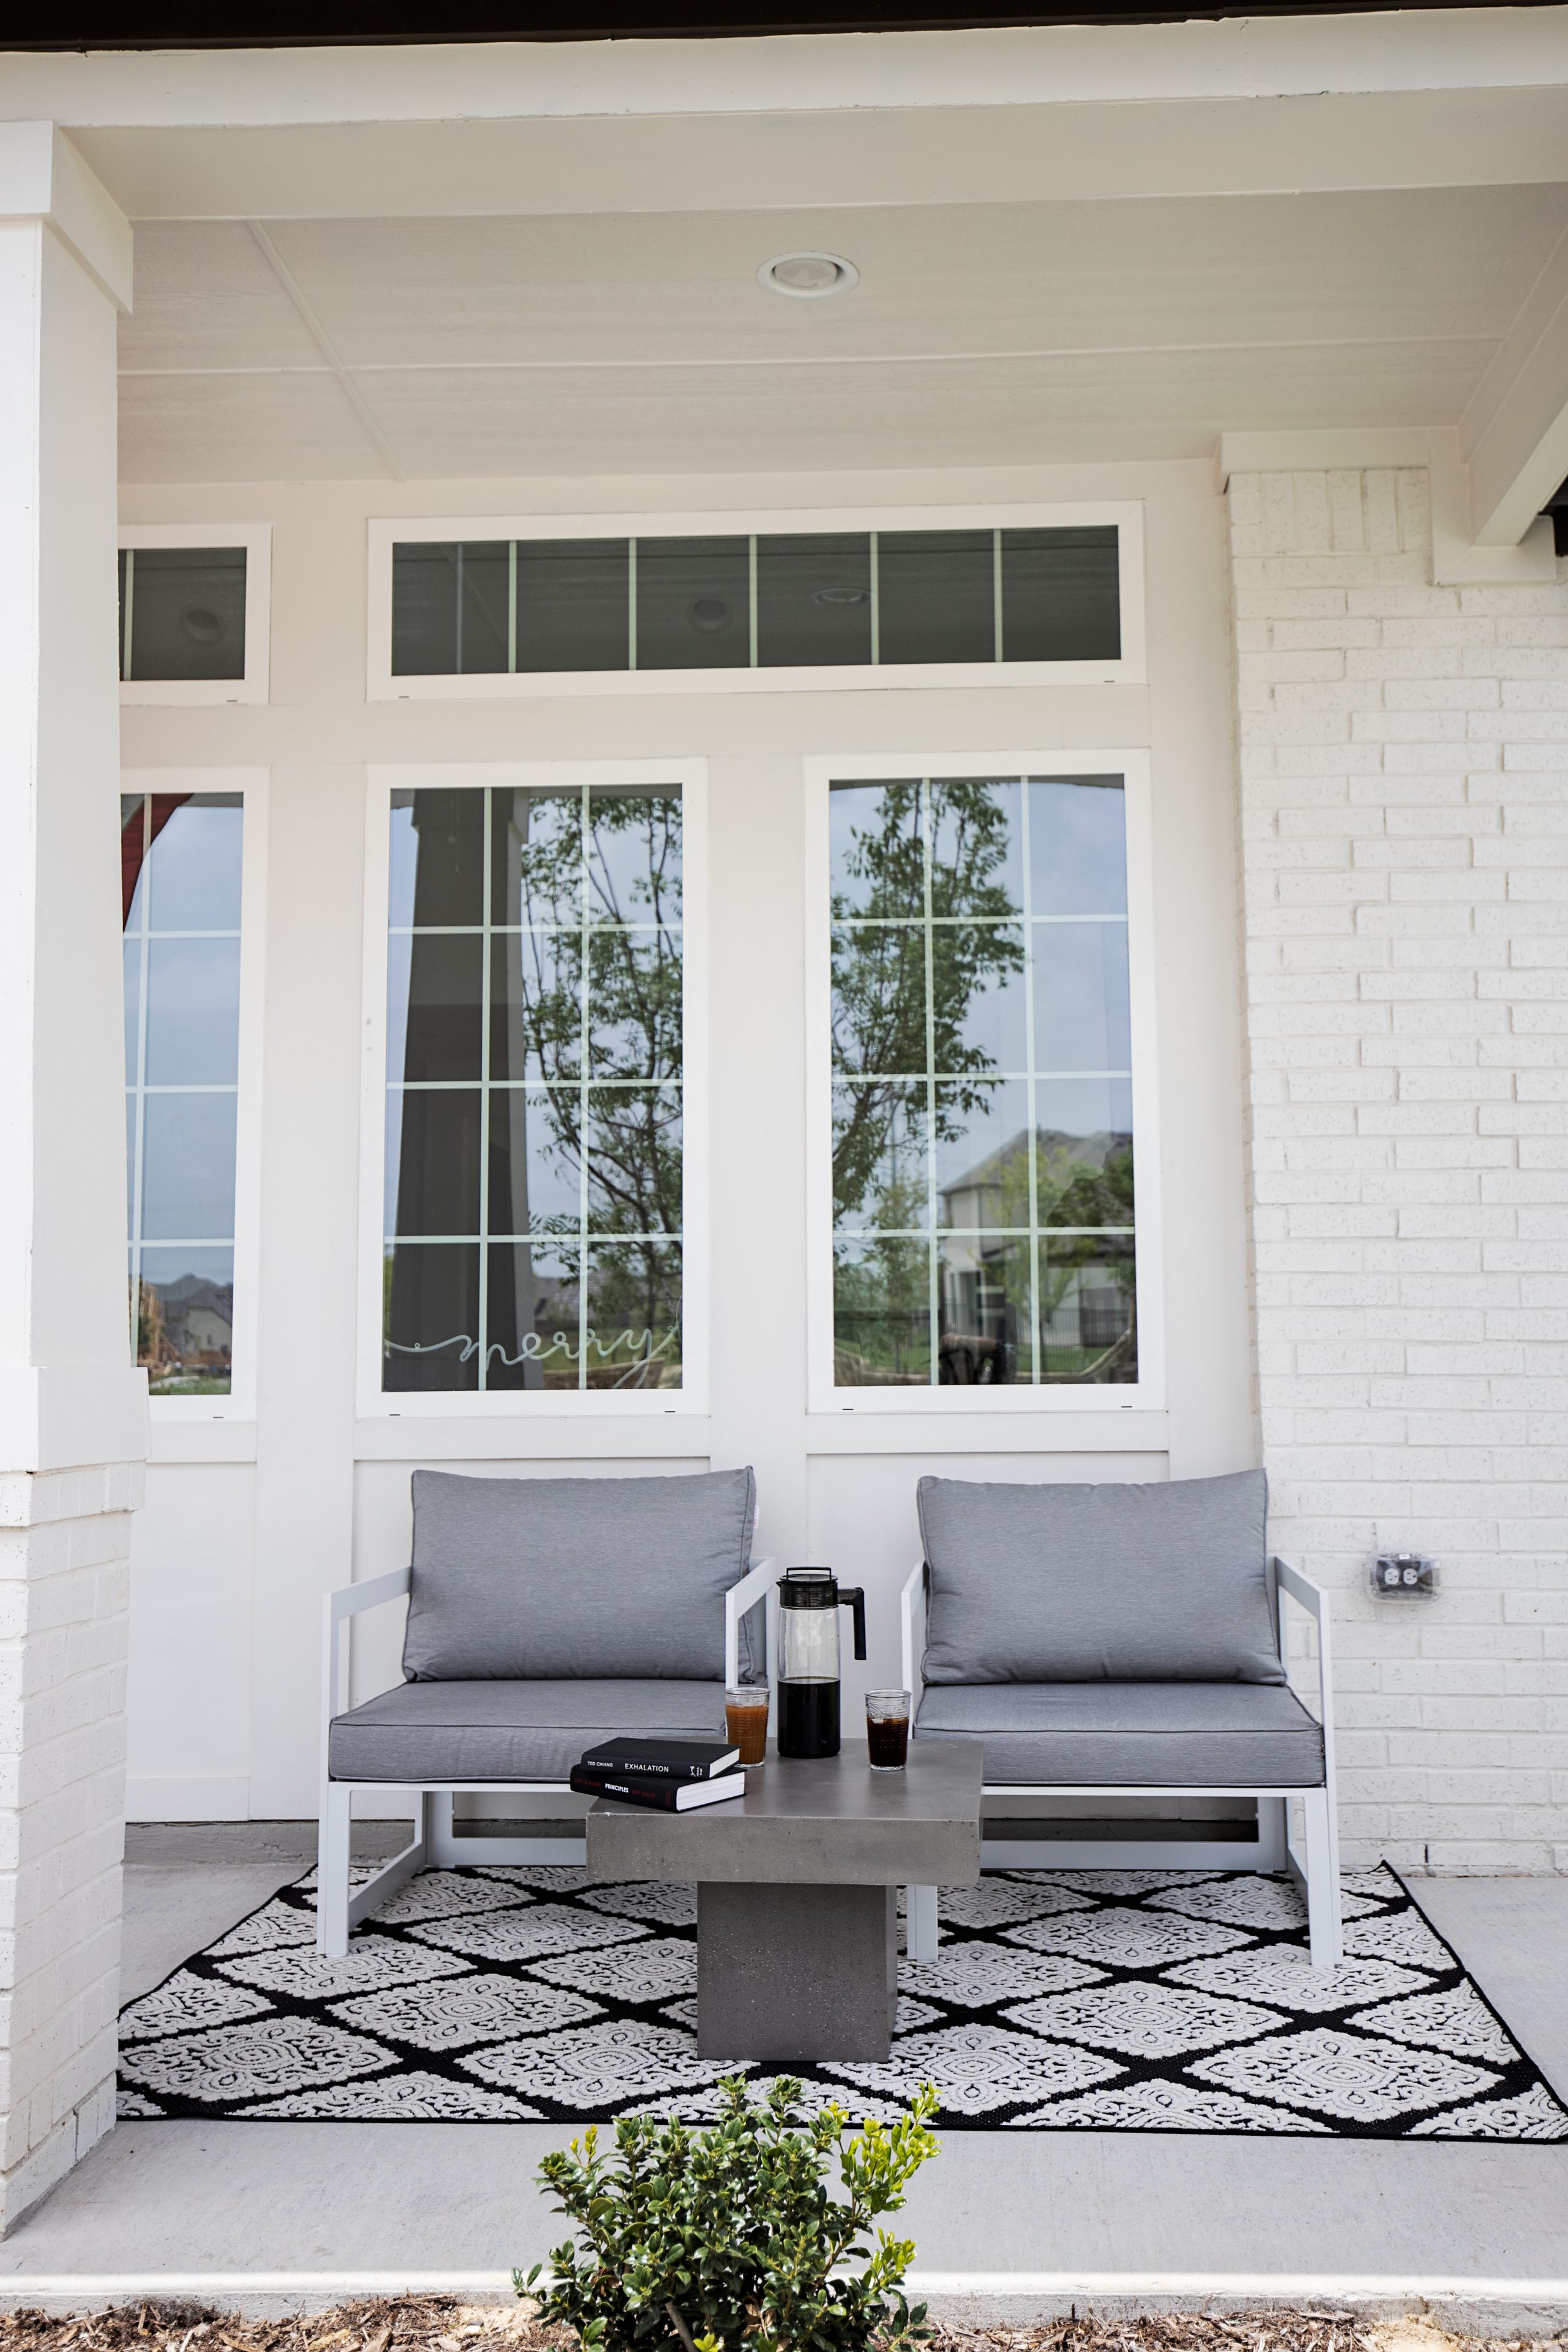 Modern outdoor furniture with white and gray chairs, concrete table, black and white rug on a white painted brick home front patio